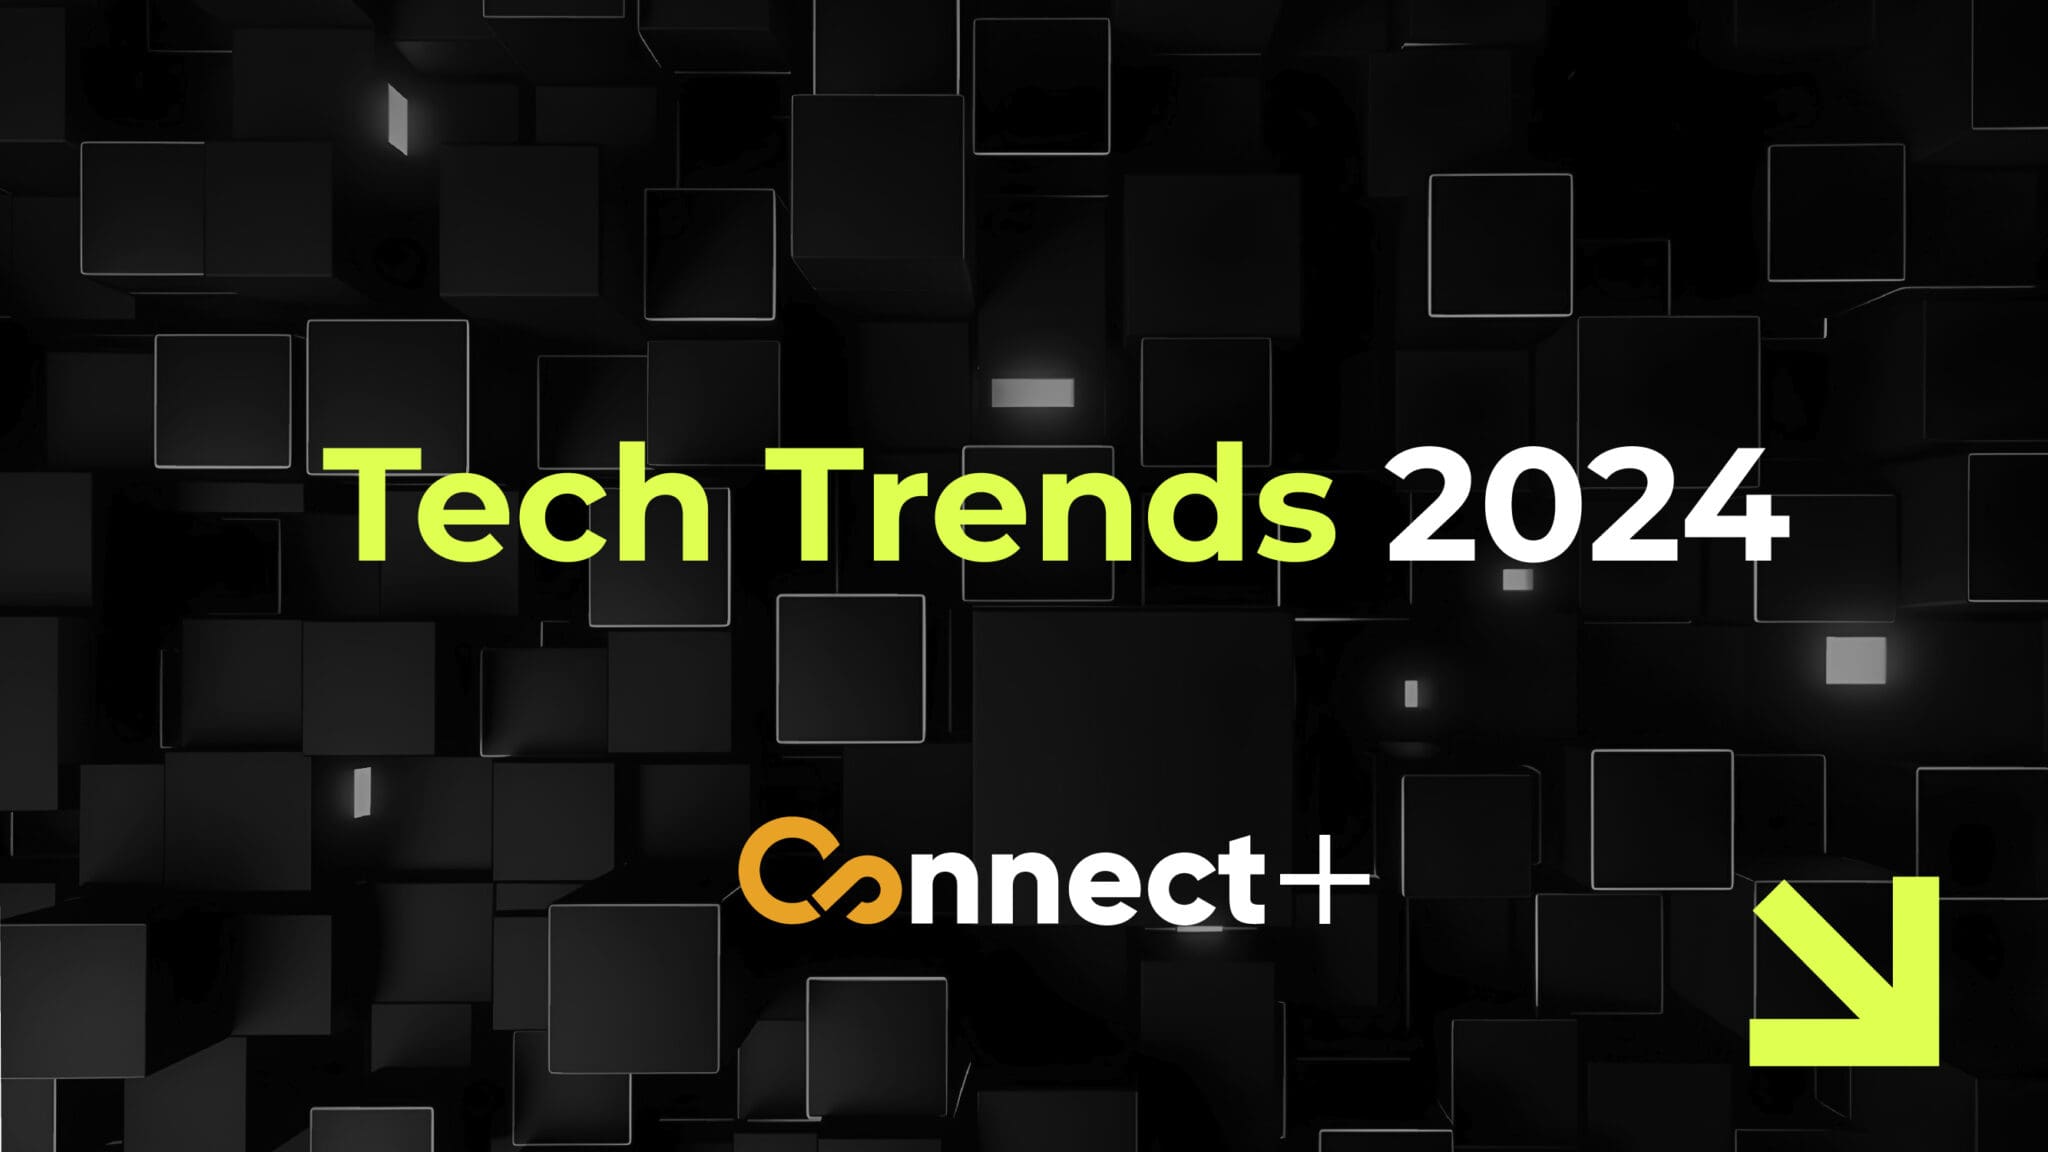 Tech Trends 2024 Connect